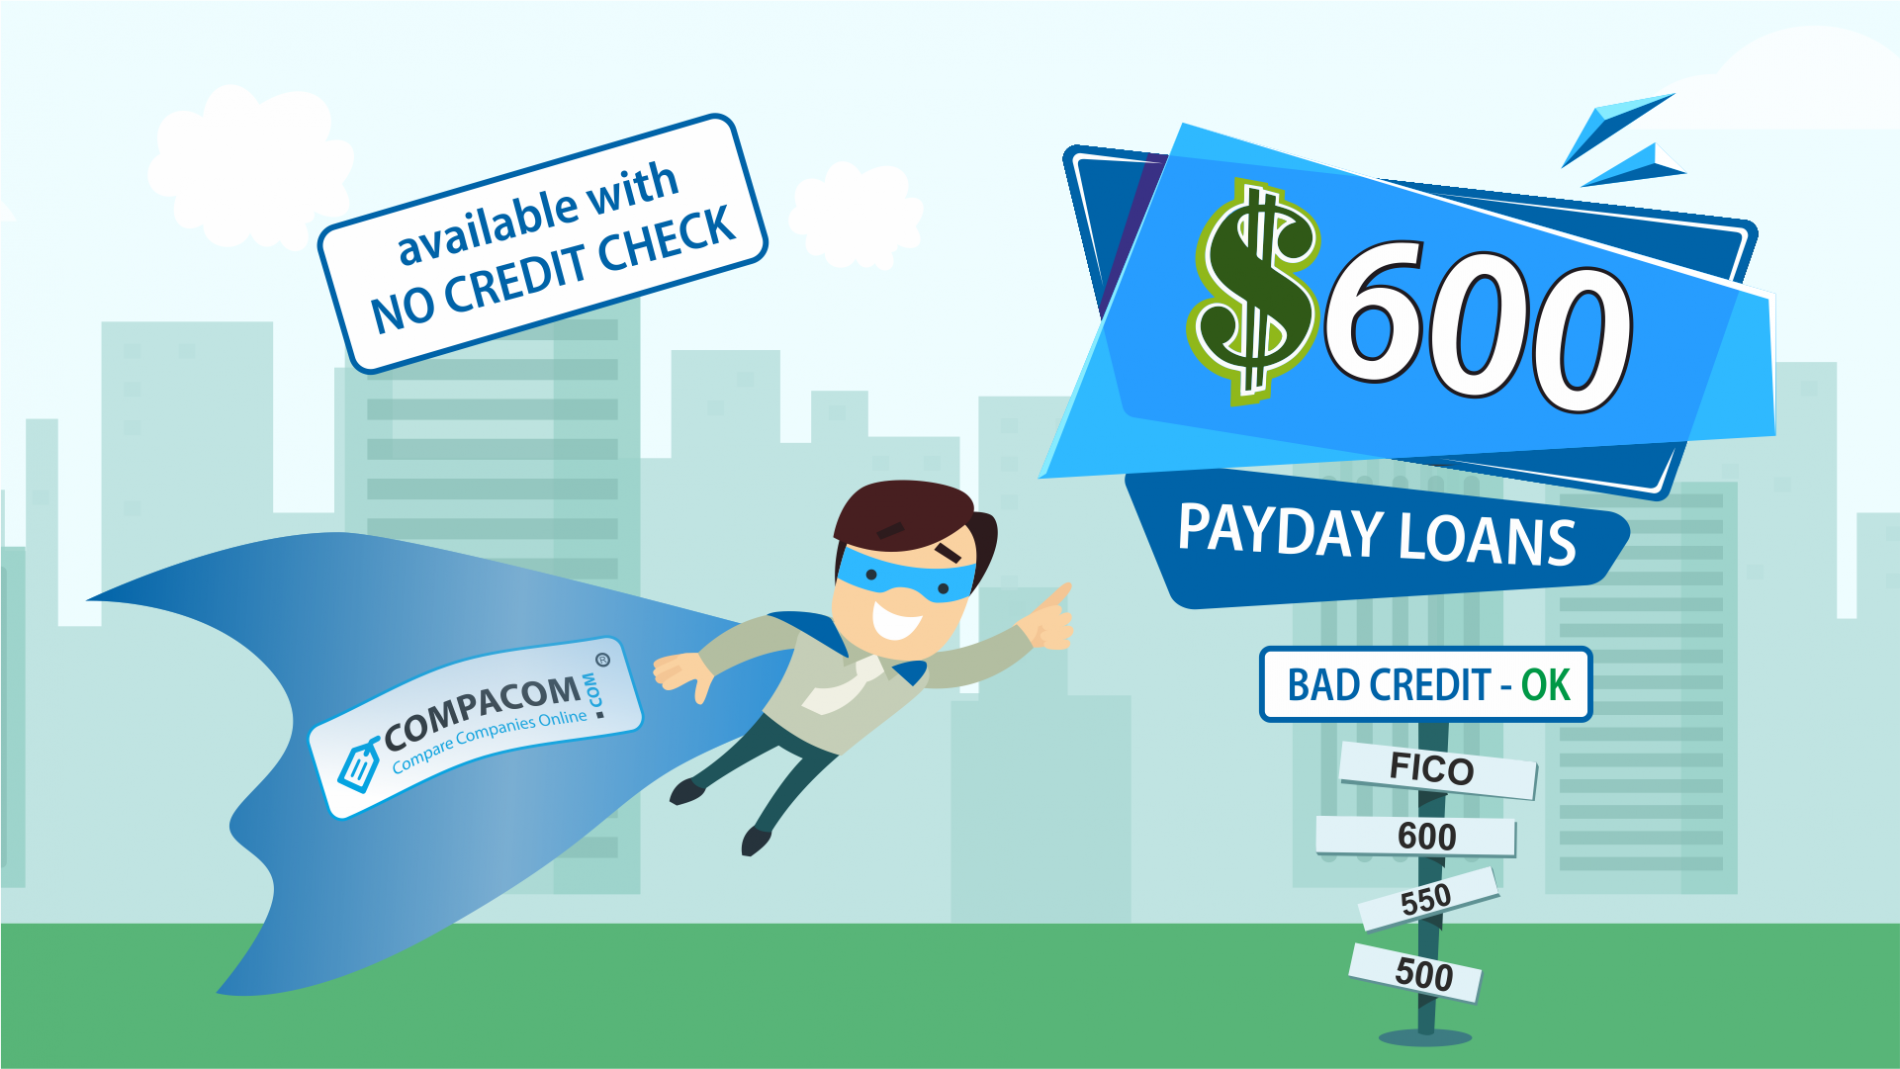 How to apply for payday loans no credit check florida Best